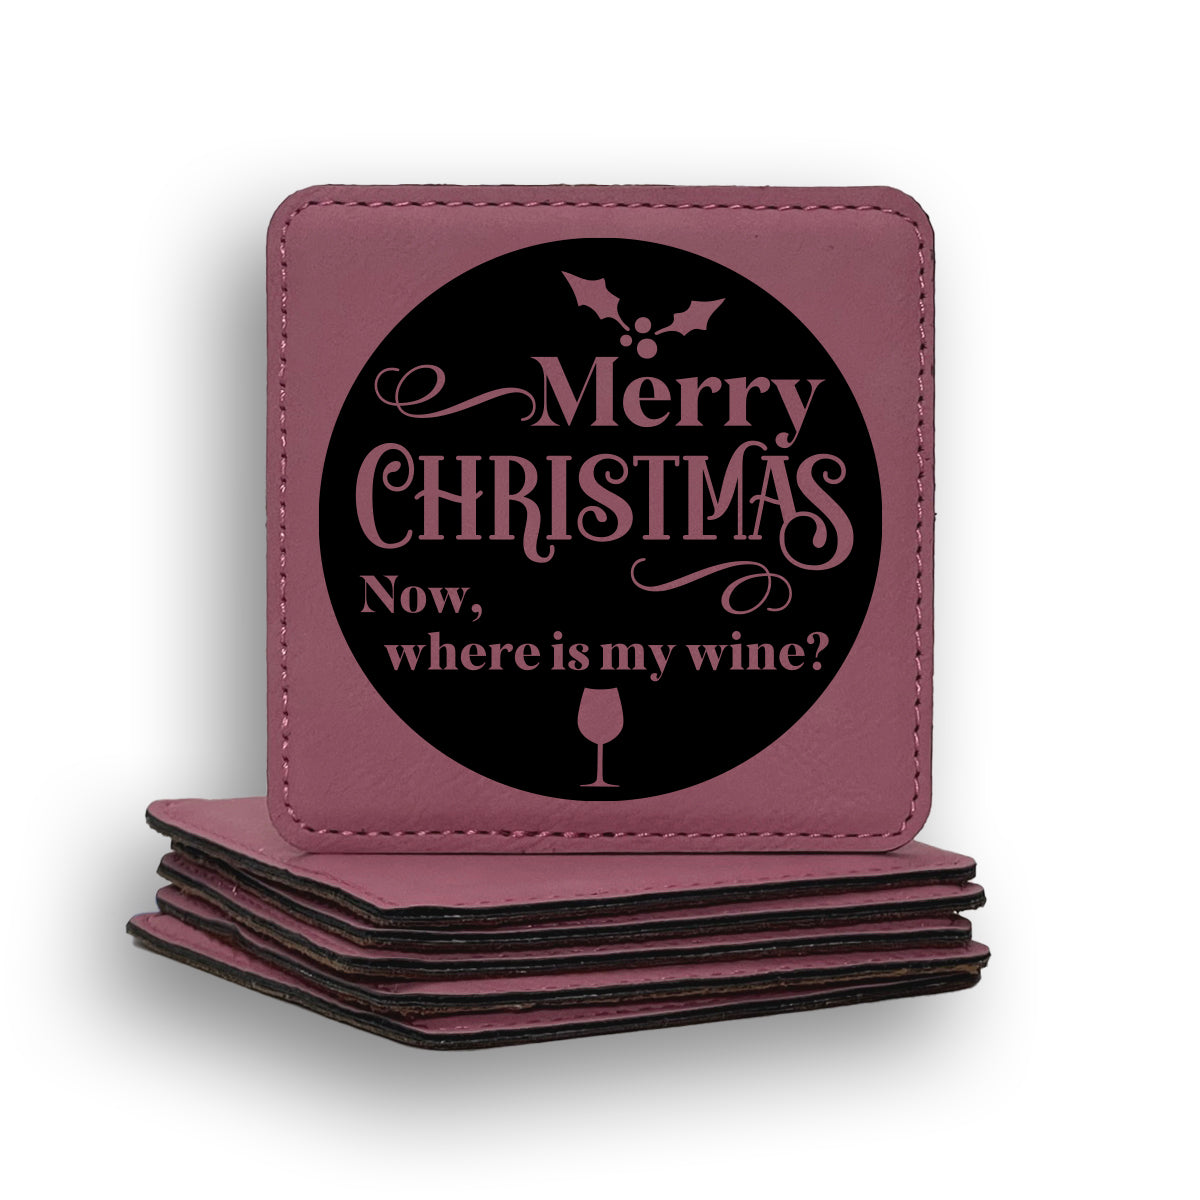 Merry Christmas Now Where Is The Wine Coaster